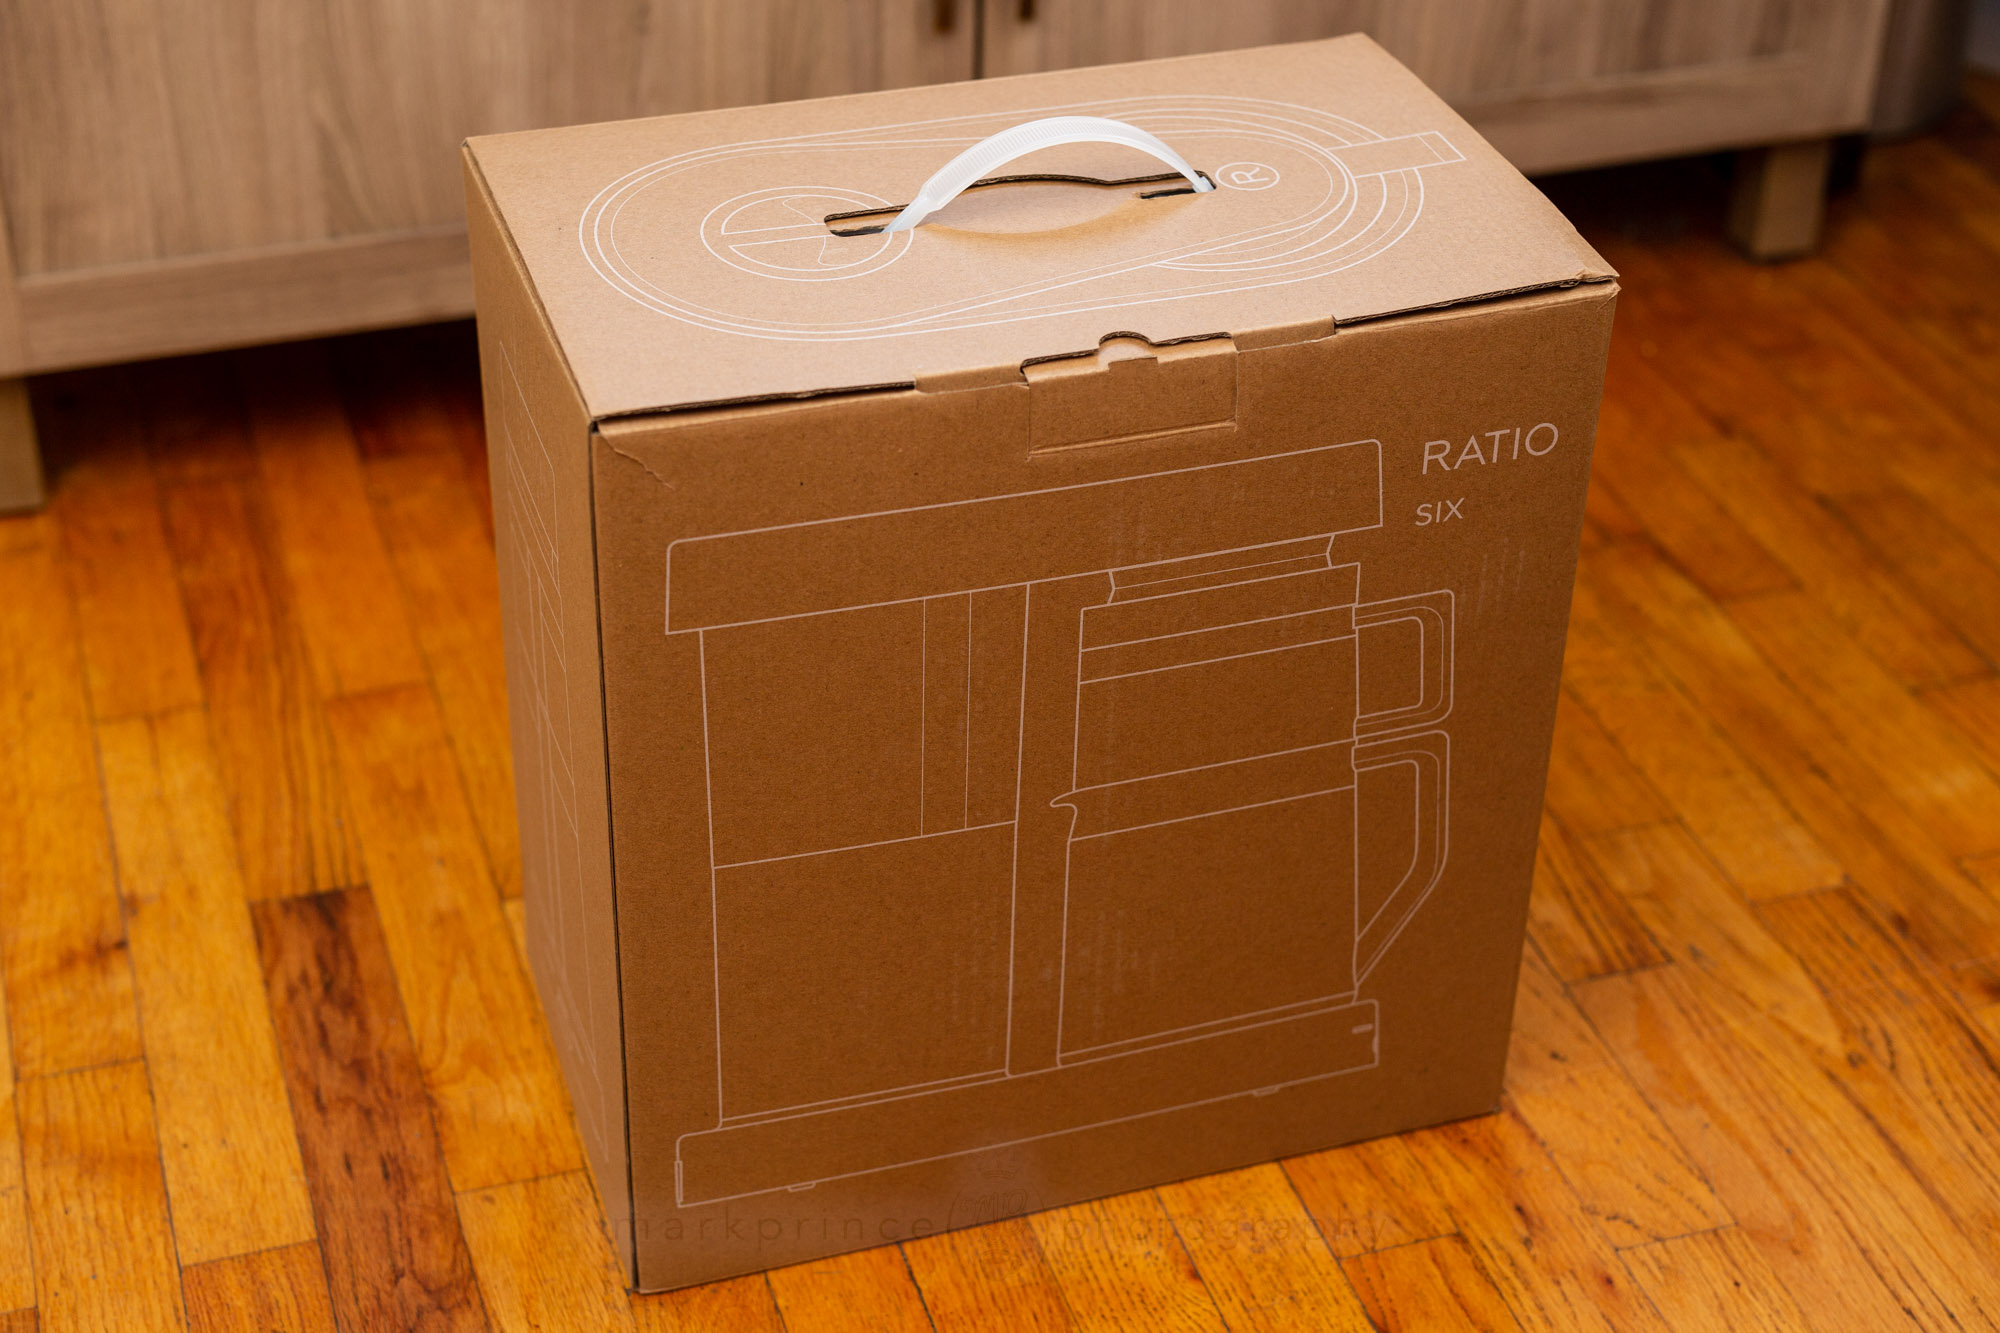 A First Look at the New Ratio Six Coffee BrewerDaily Coffee News by Roast  Magazine